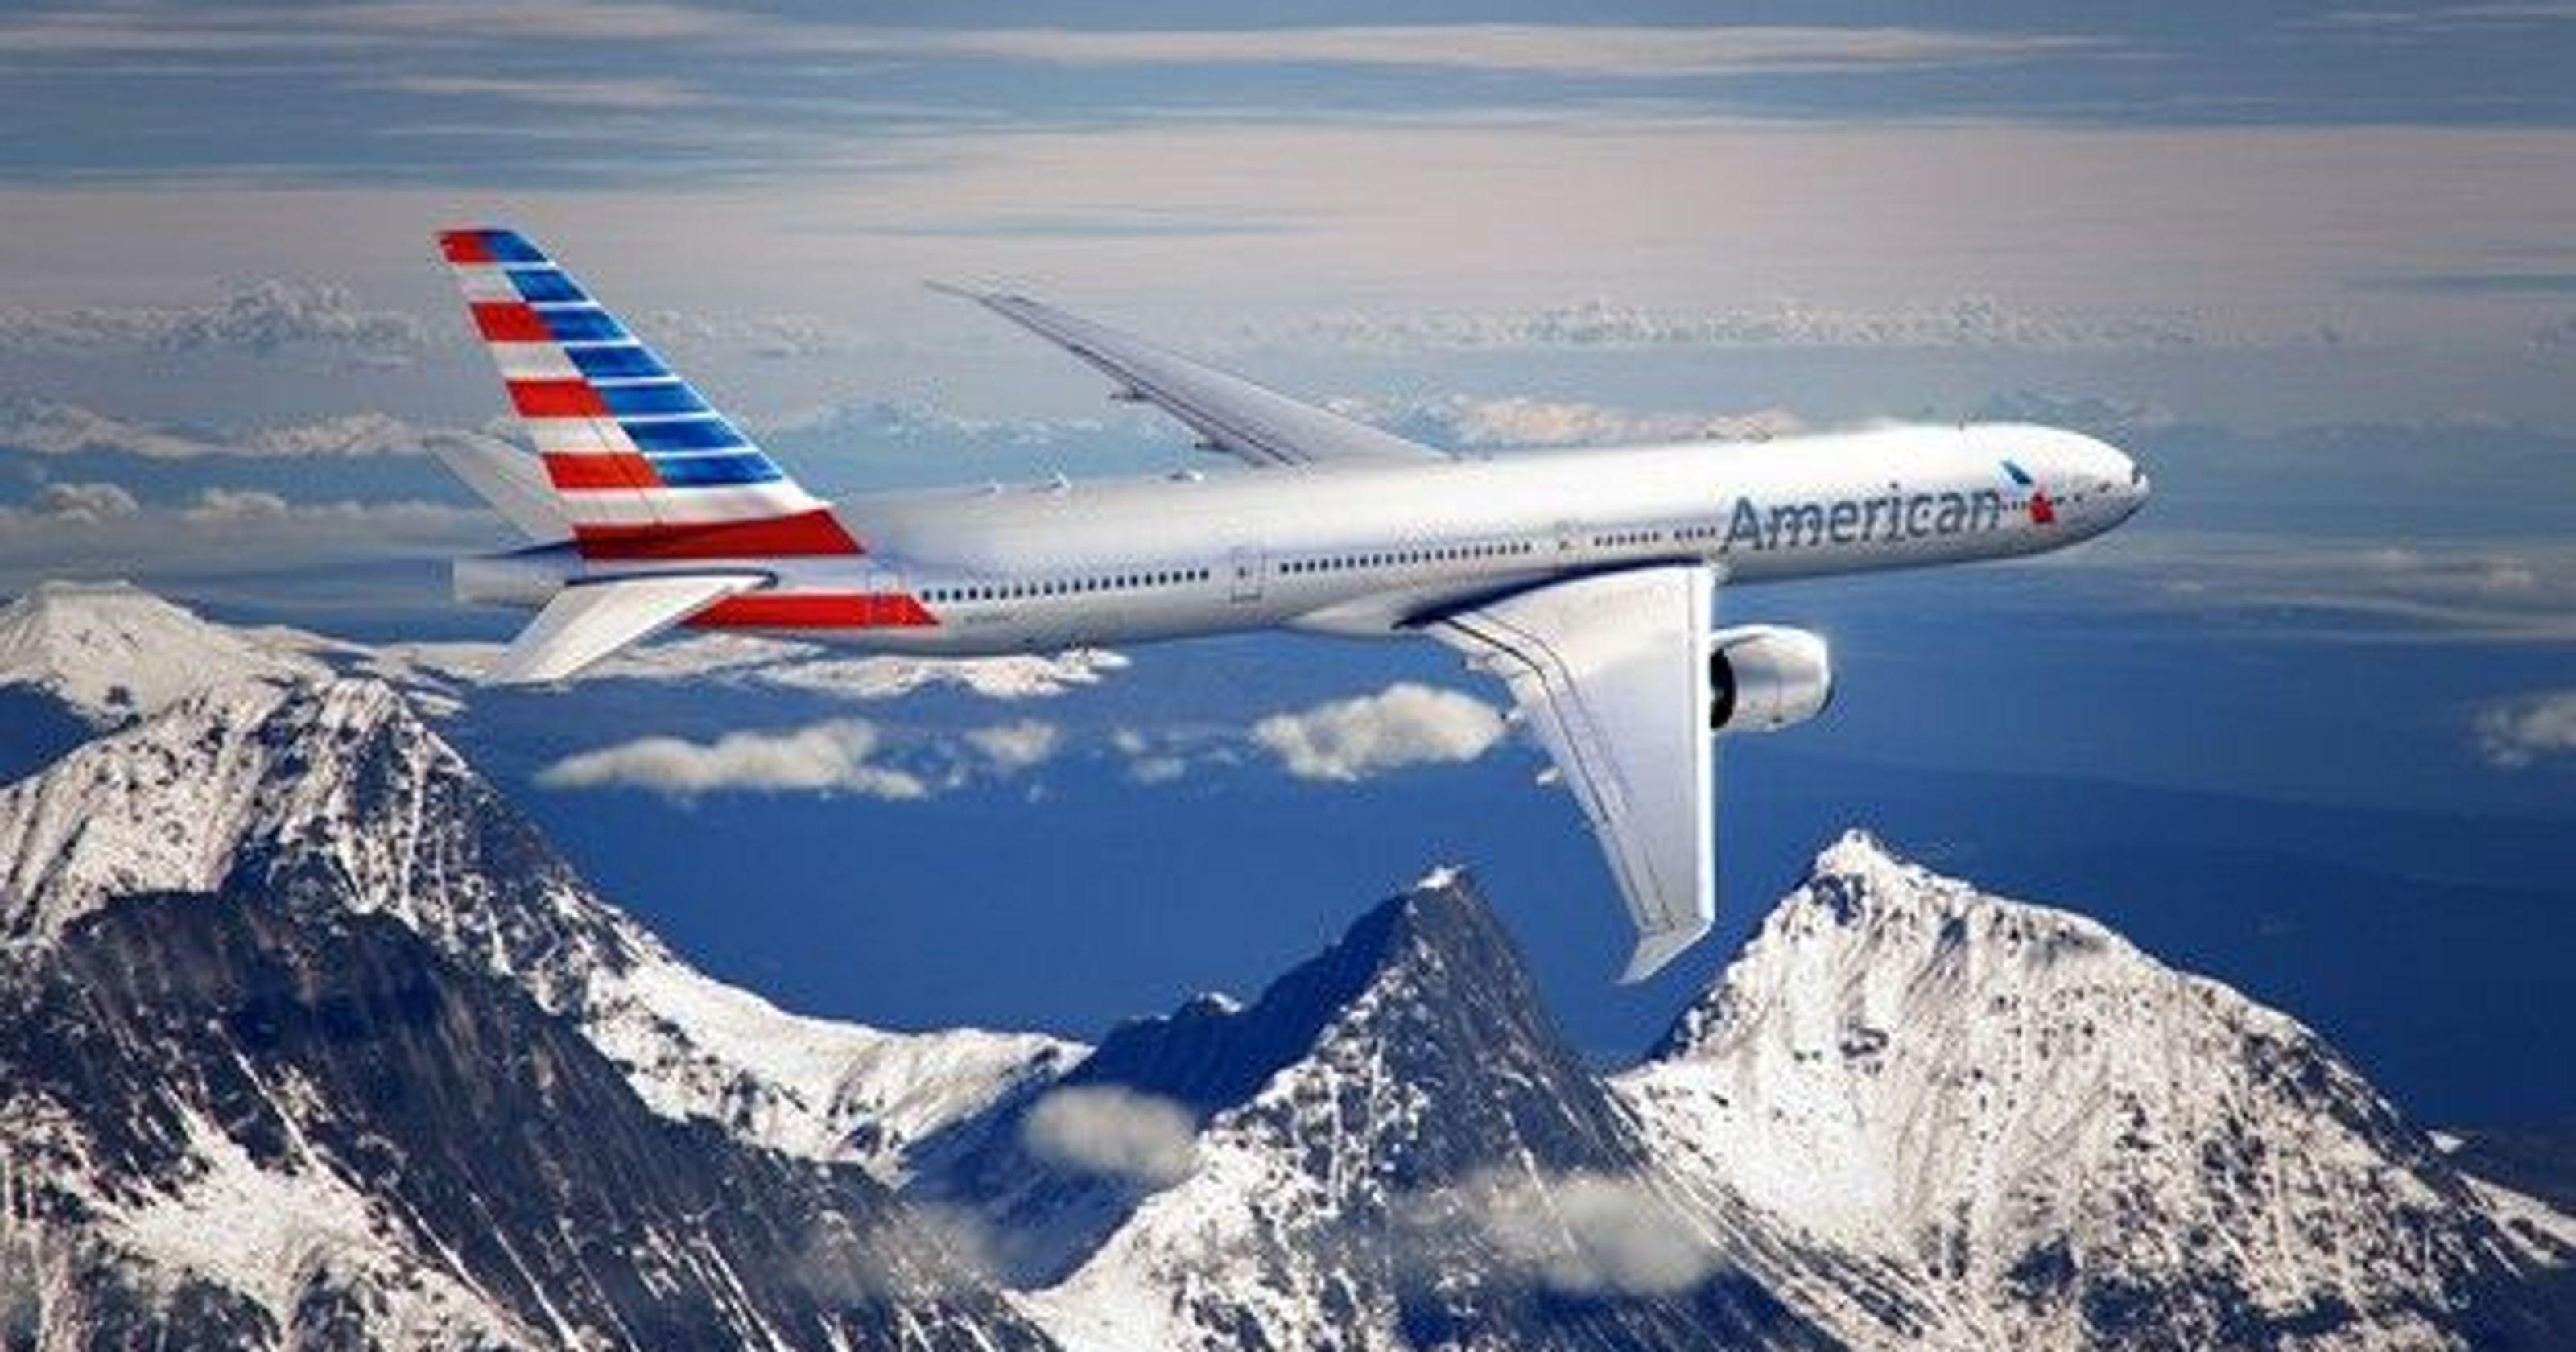 Airline with Red Swoosh Logo - Copyright board rejects AA logo -- again